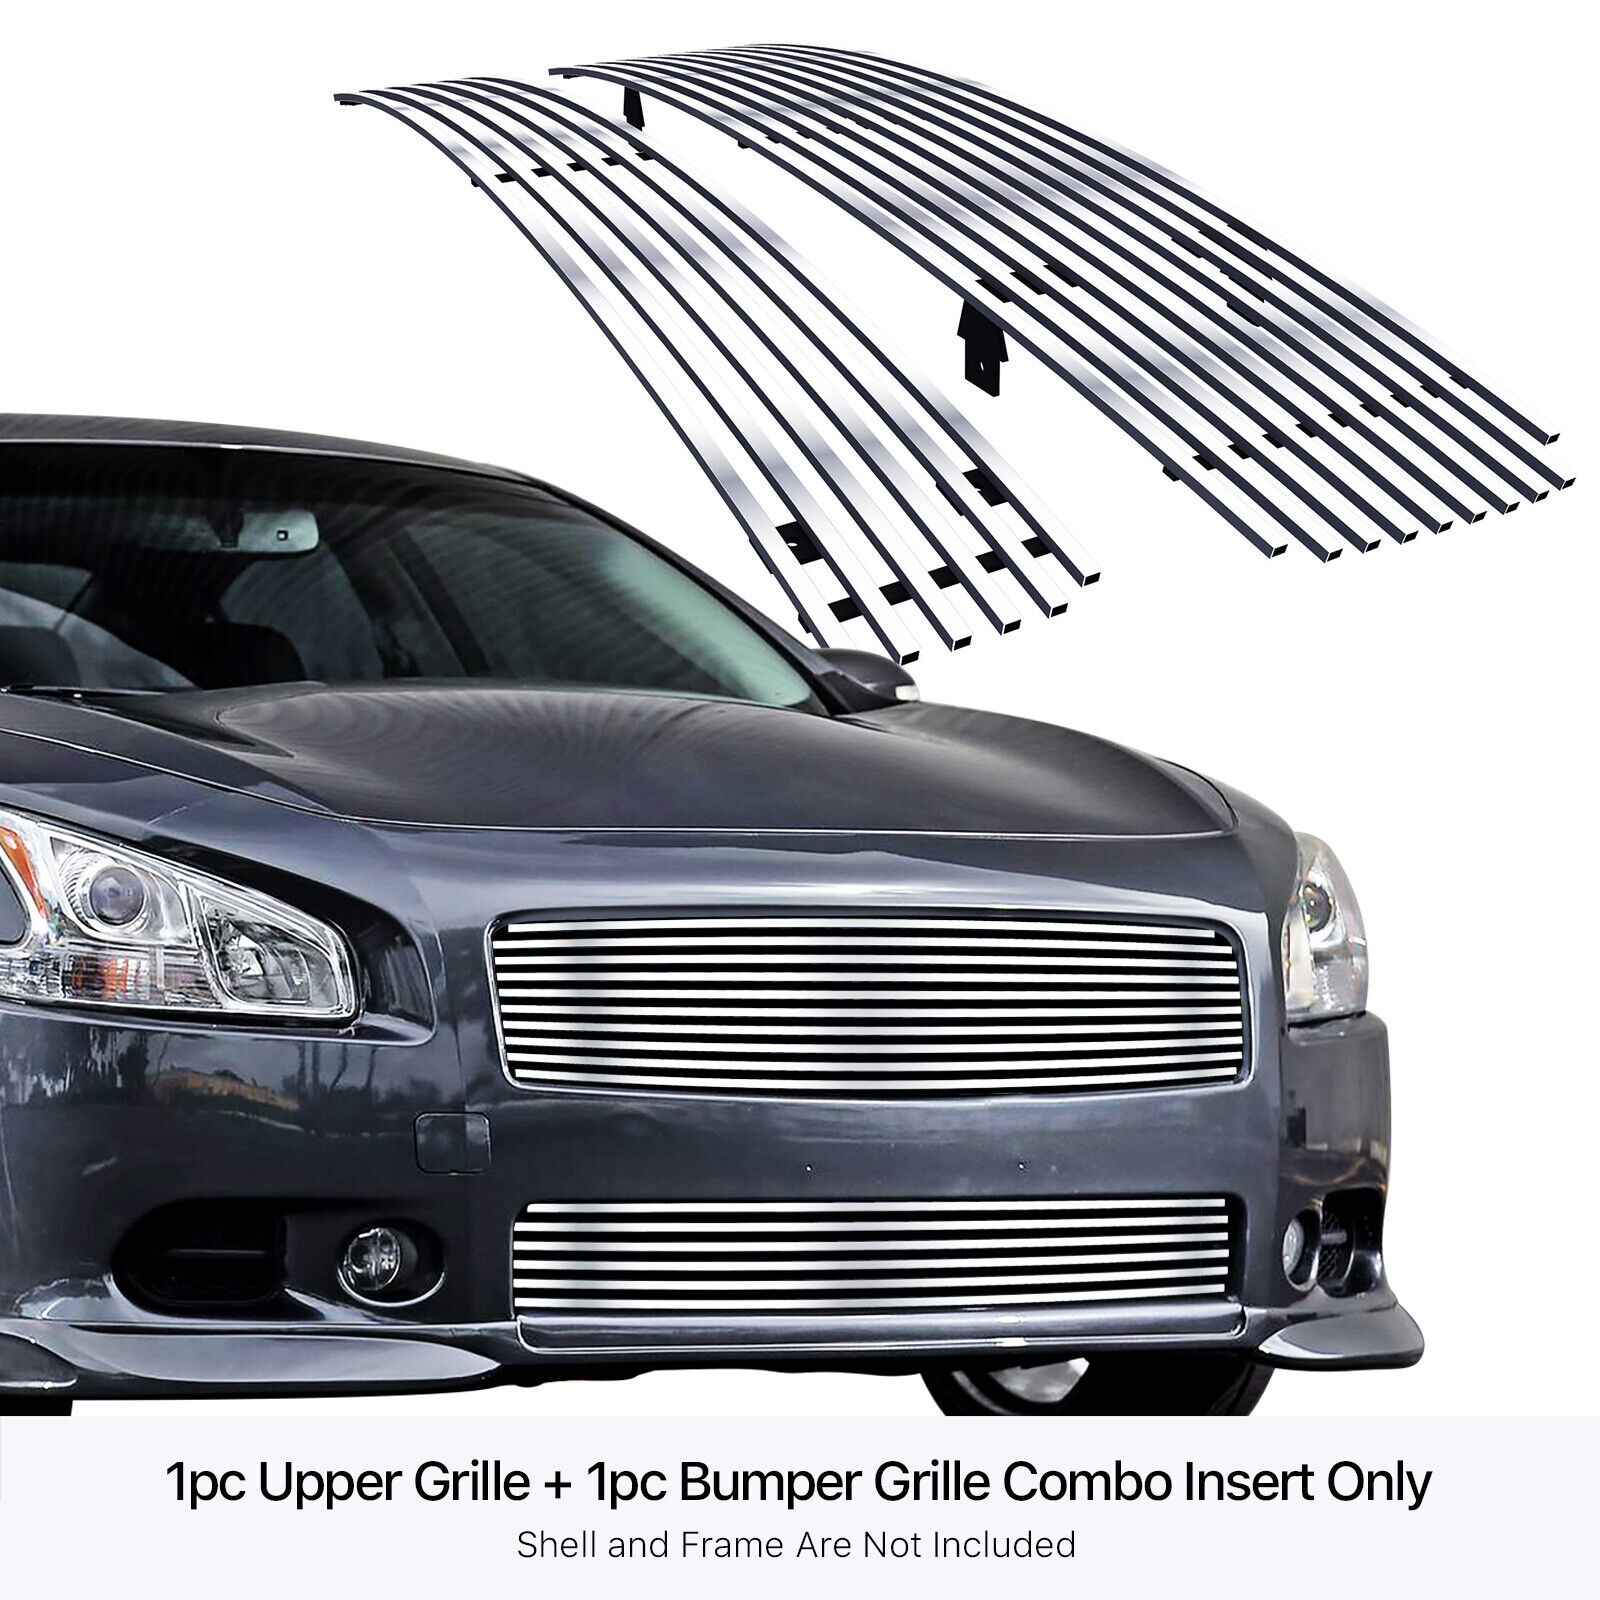 Fits 2009-2014 Nissan Maxima Billet Grille Grill Combo Insert